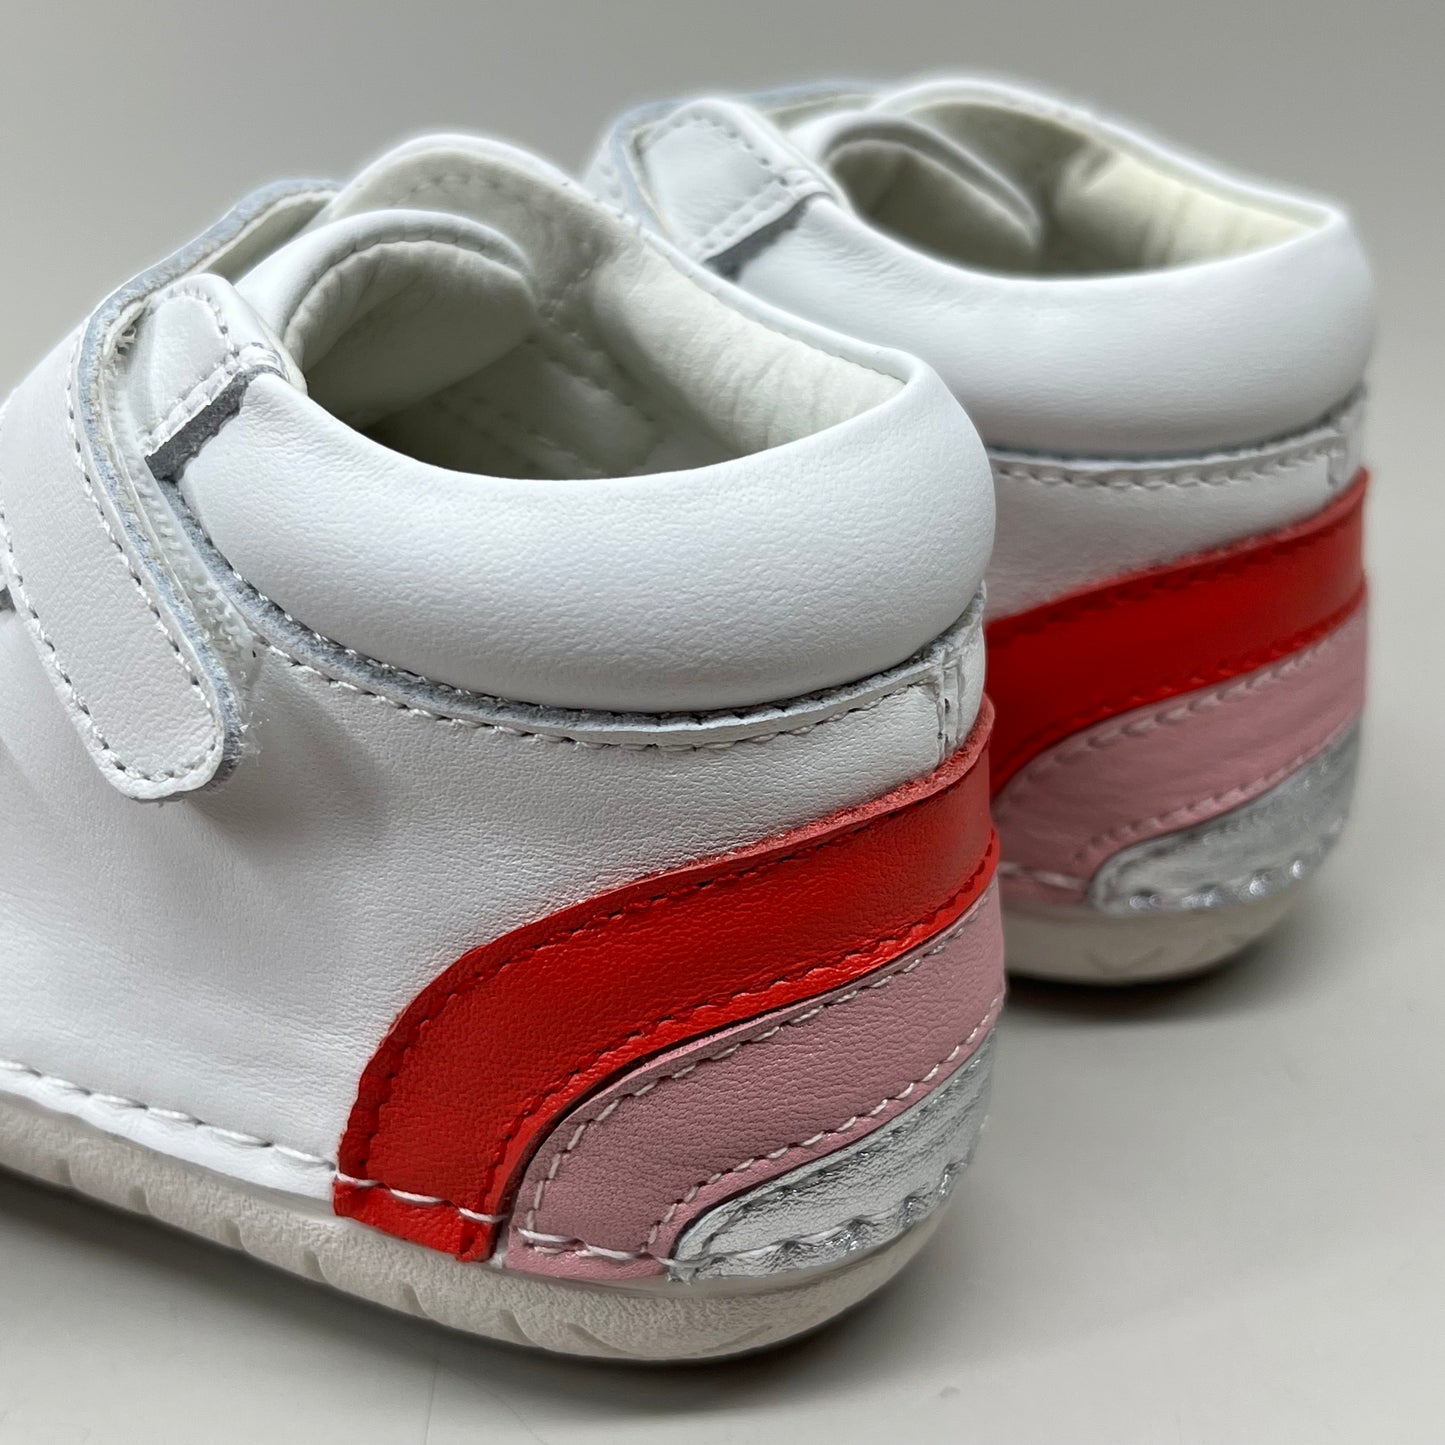 OLD SOLES Baby Champster Leather Shoe Sz 19 US 3 Snow/Red/ Pink/Silver #4091